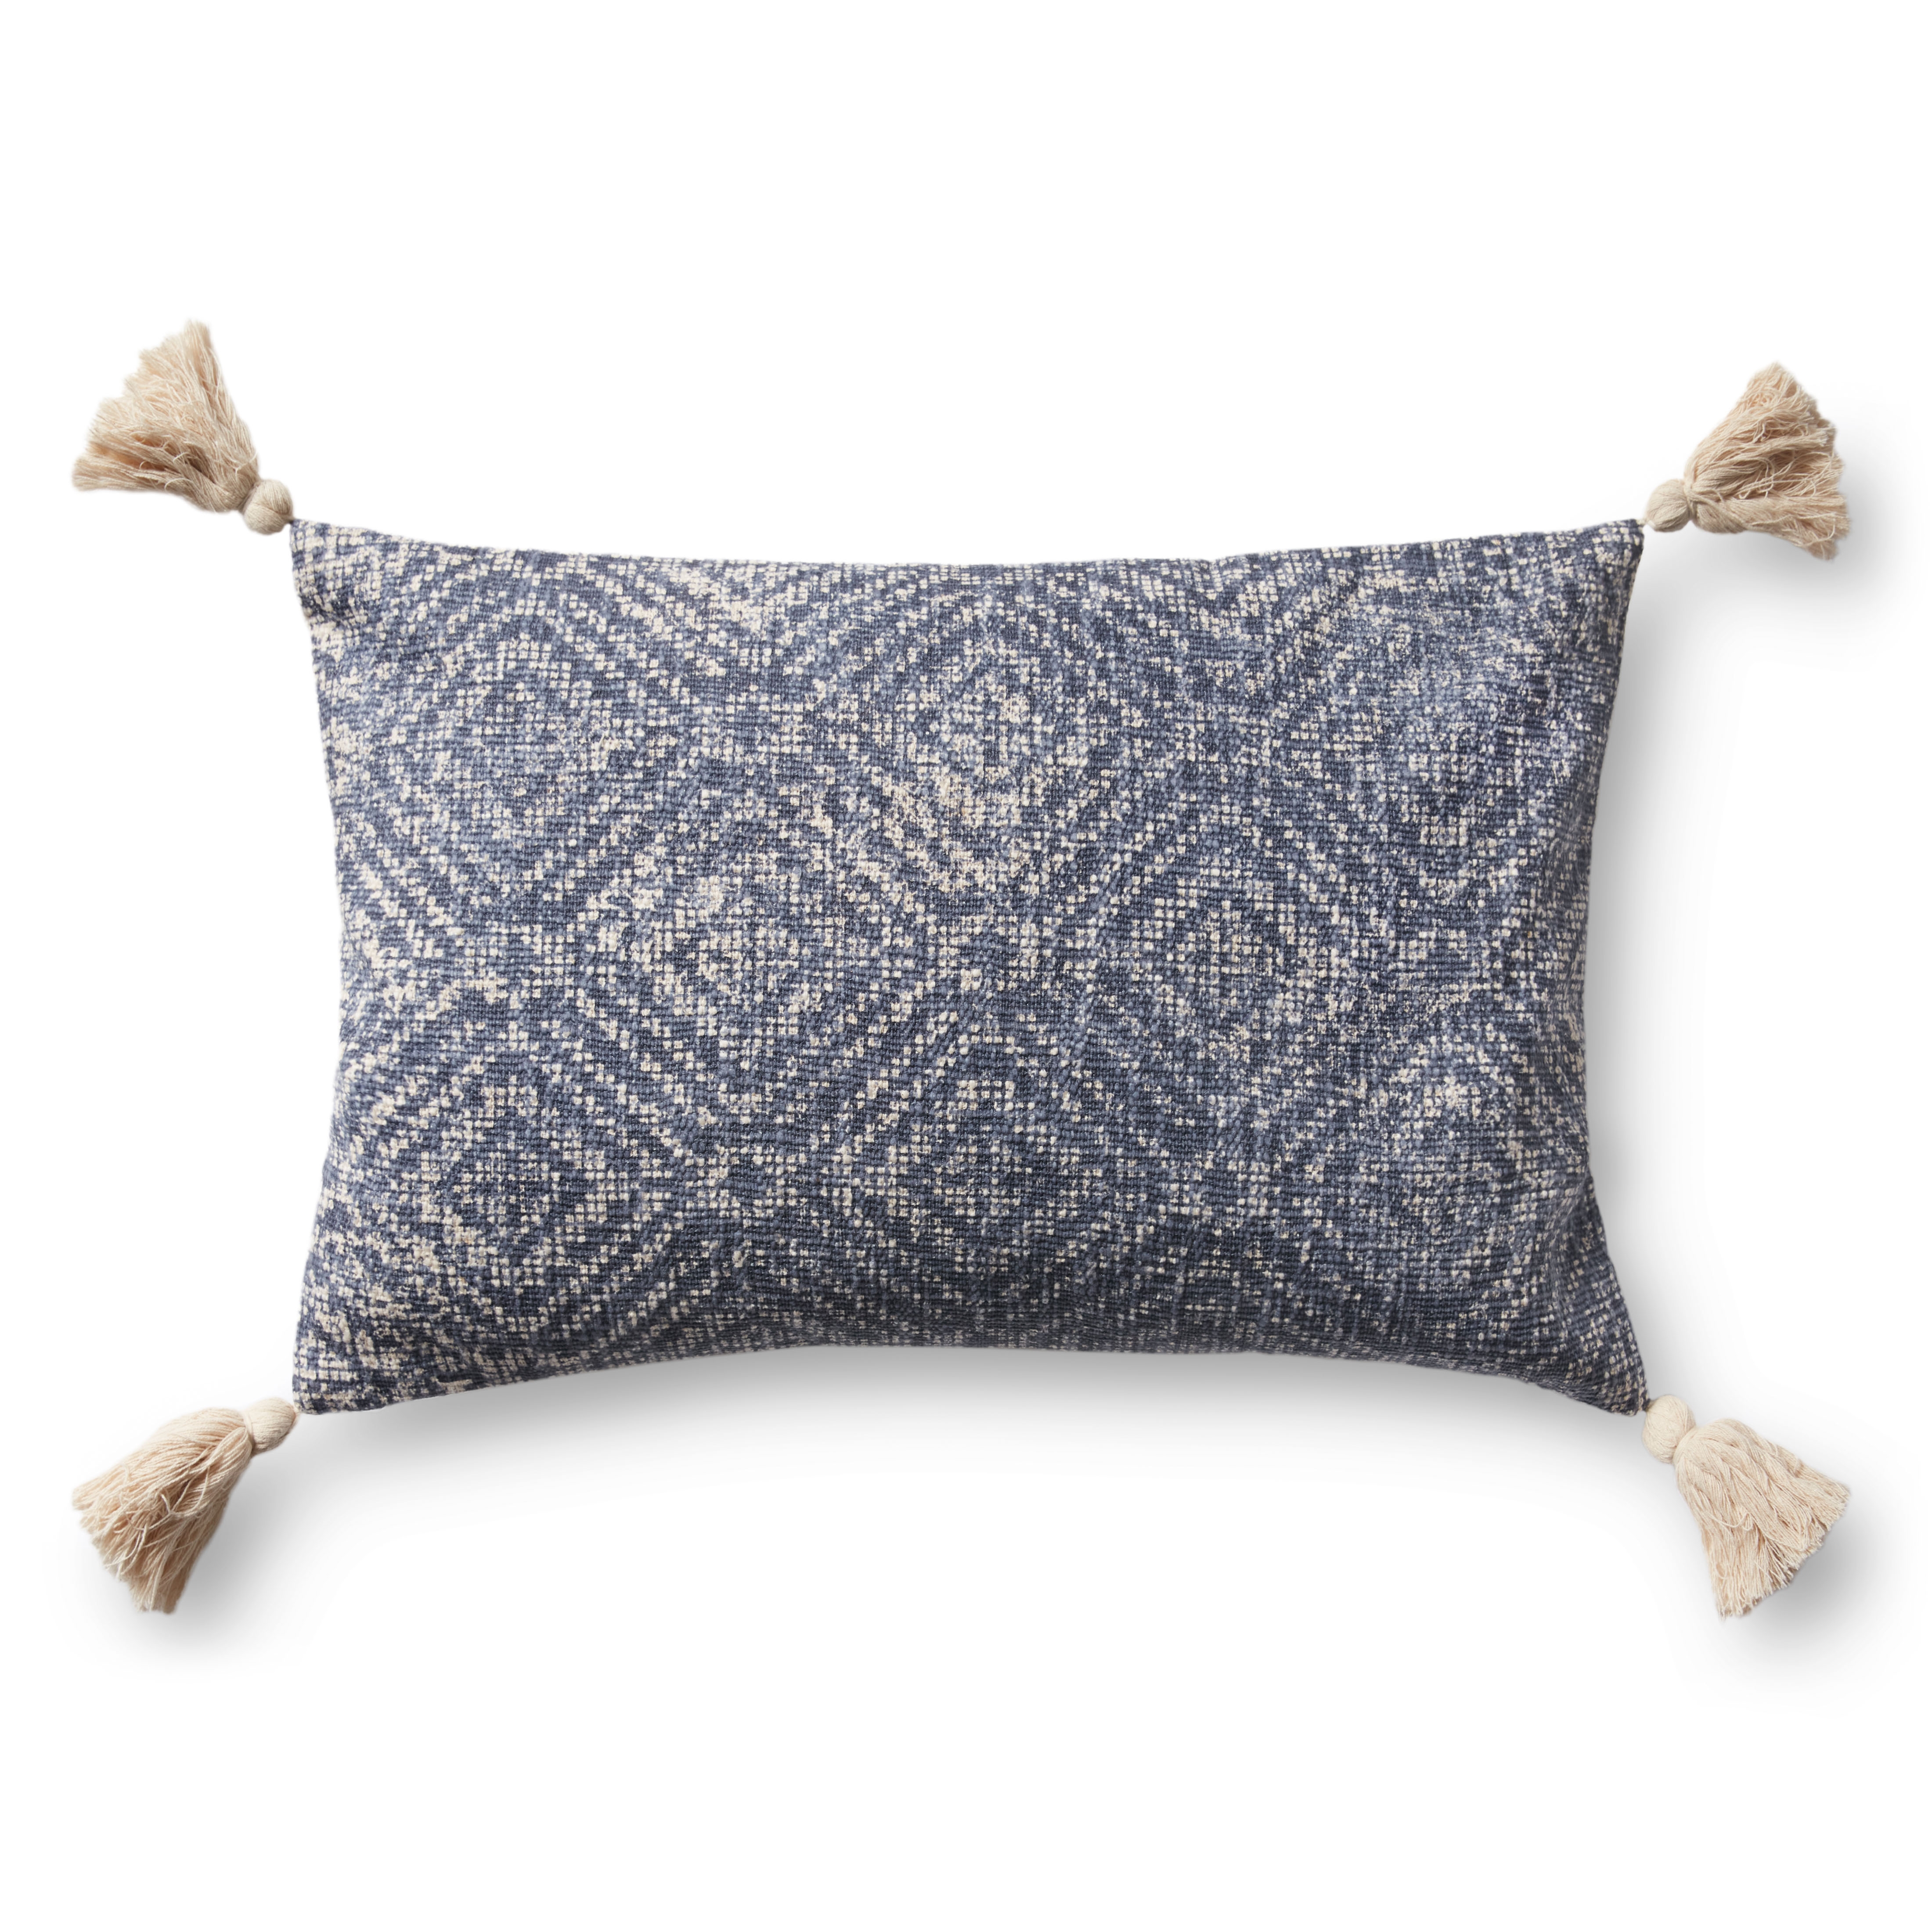 PILLOWS P0621 BLUE 13" x 21" Cover Only - Image 0